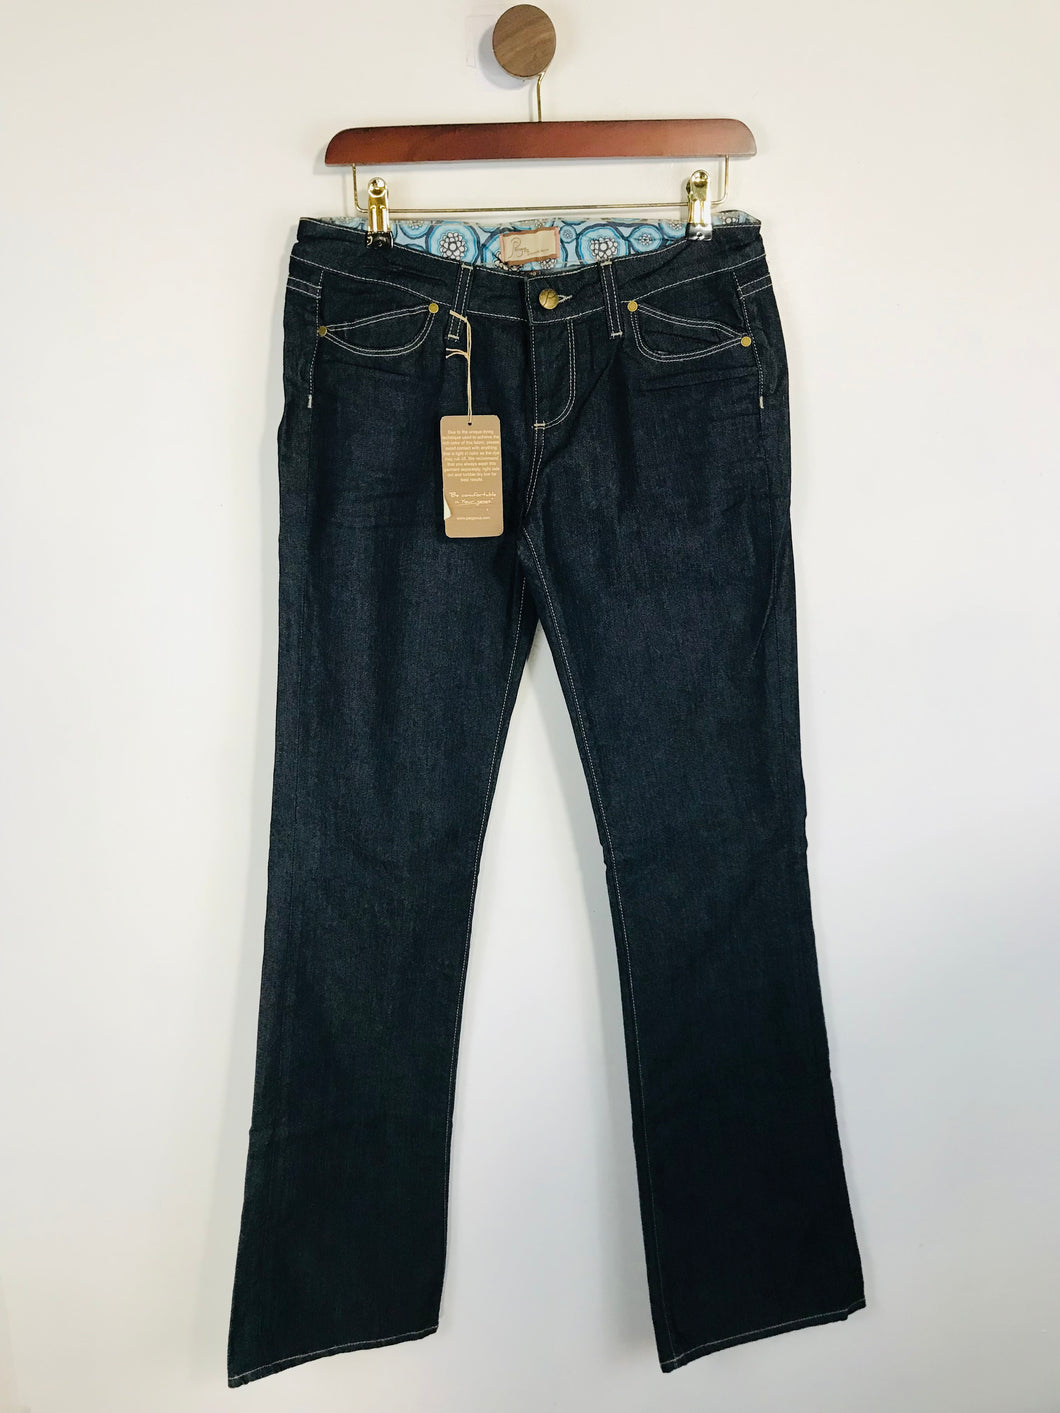 Paige Women's Straight Jeans NWT | 29 UK10-12 | Blue